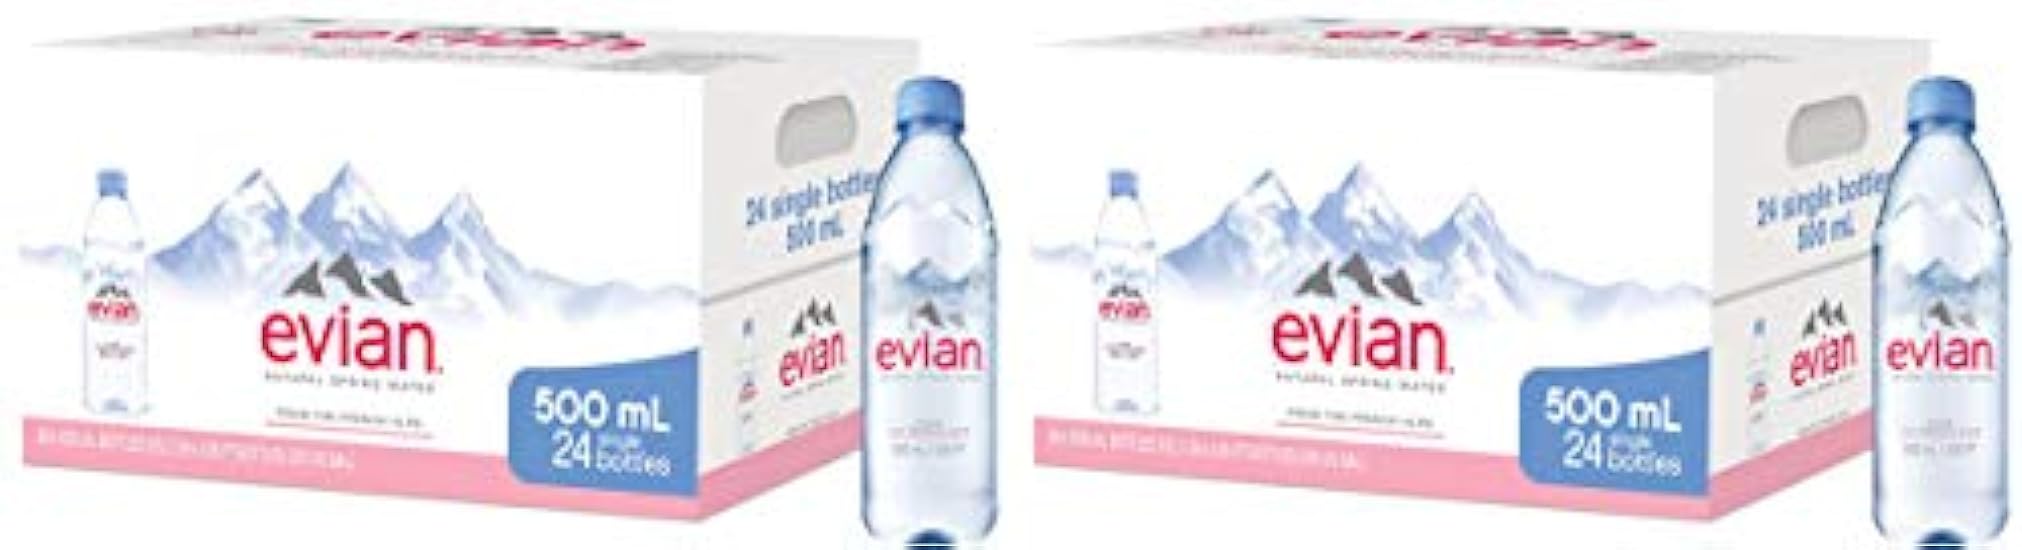 evian dSfg Natural Spring Wasser Individual 500 ml (16.9 oz.) Bottles, Naturally Filtered Spring Wasser in Individual-Sized Plastic Bottles, 2 Cases of 24 372536153